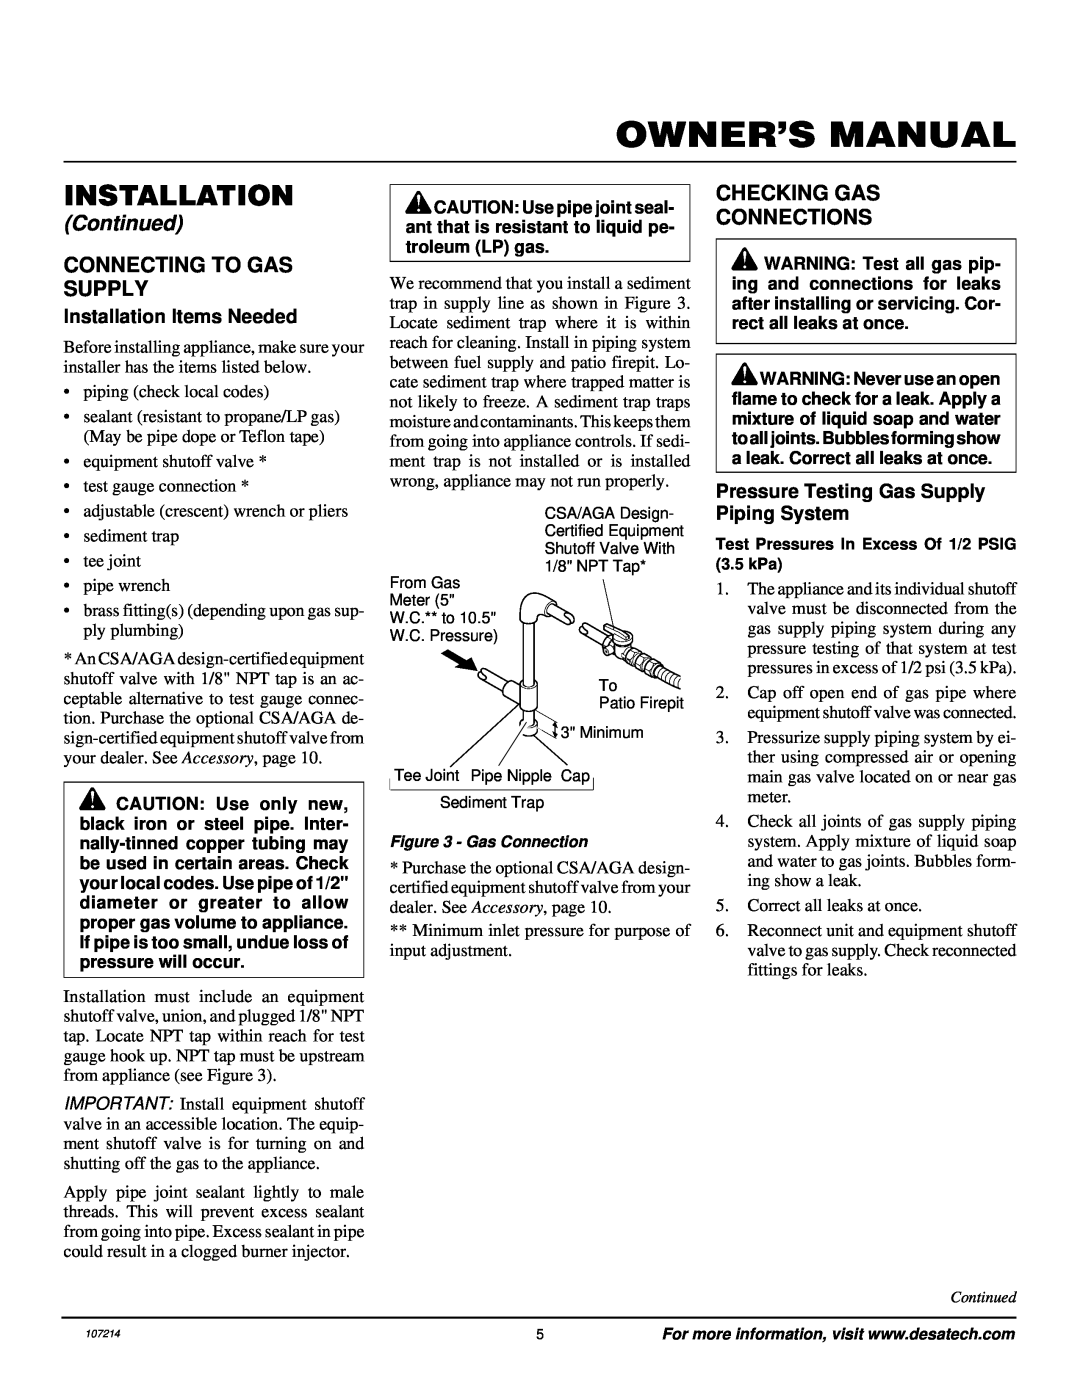 Desa Tech PC3460NG, PC4670NG Installation, Owner’S Manual, Continued, Connecting To Gas Supply, Checking Gas Connections 